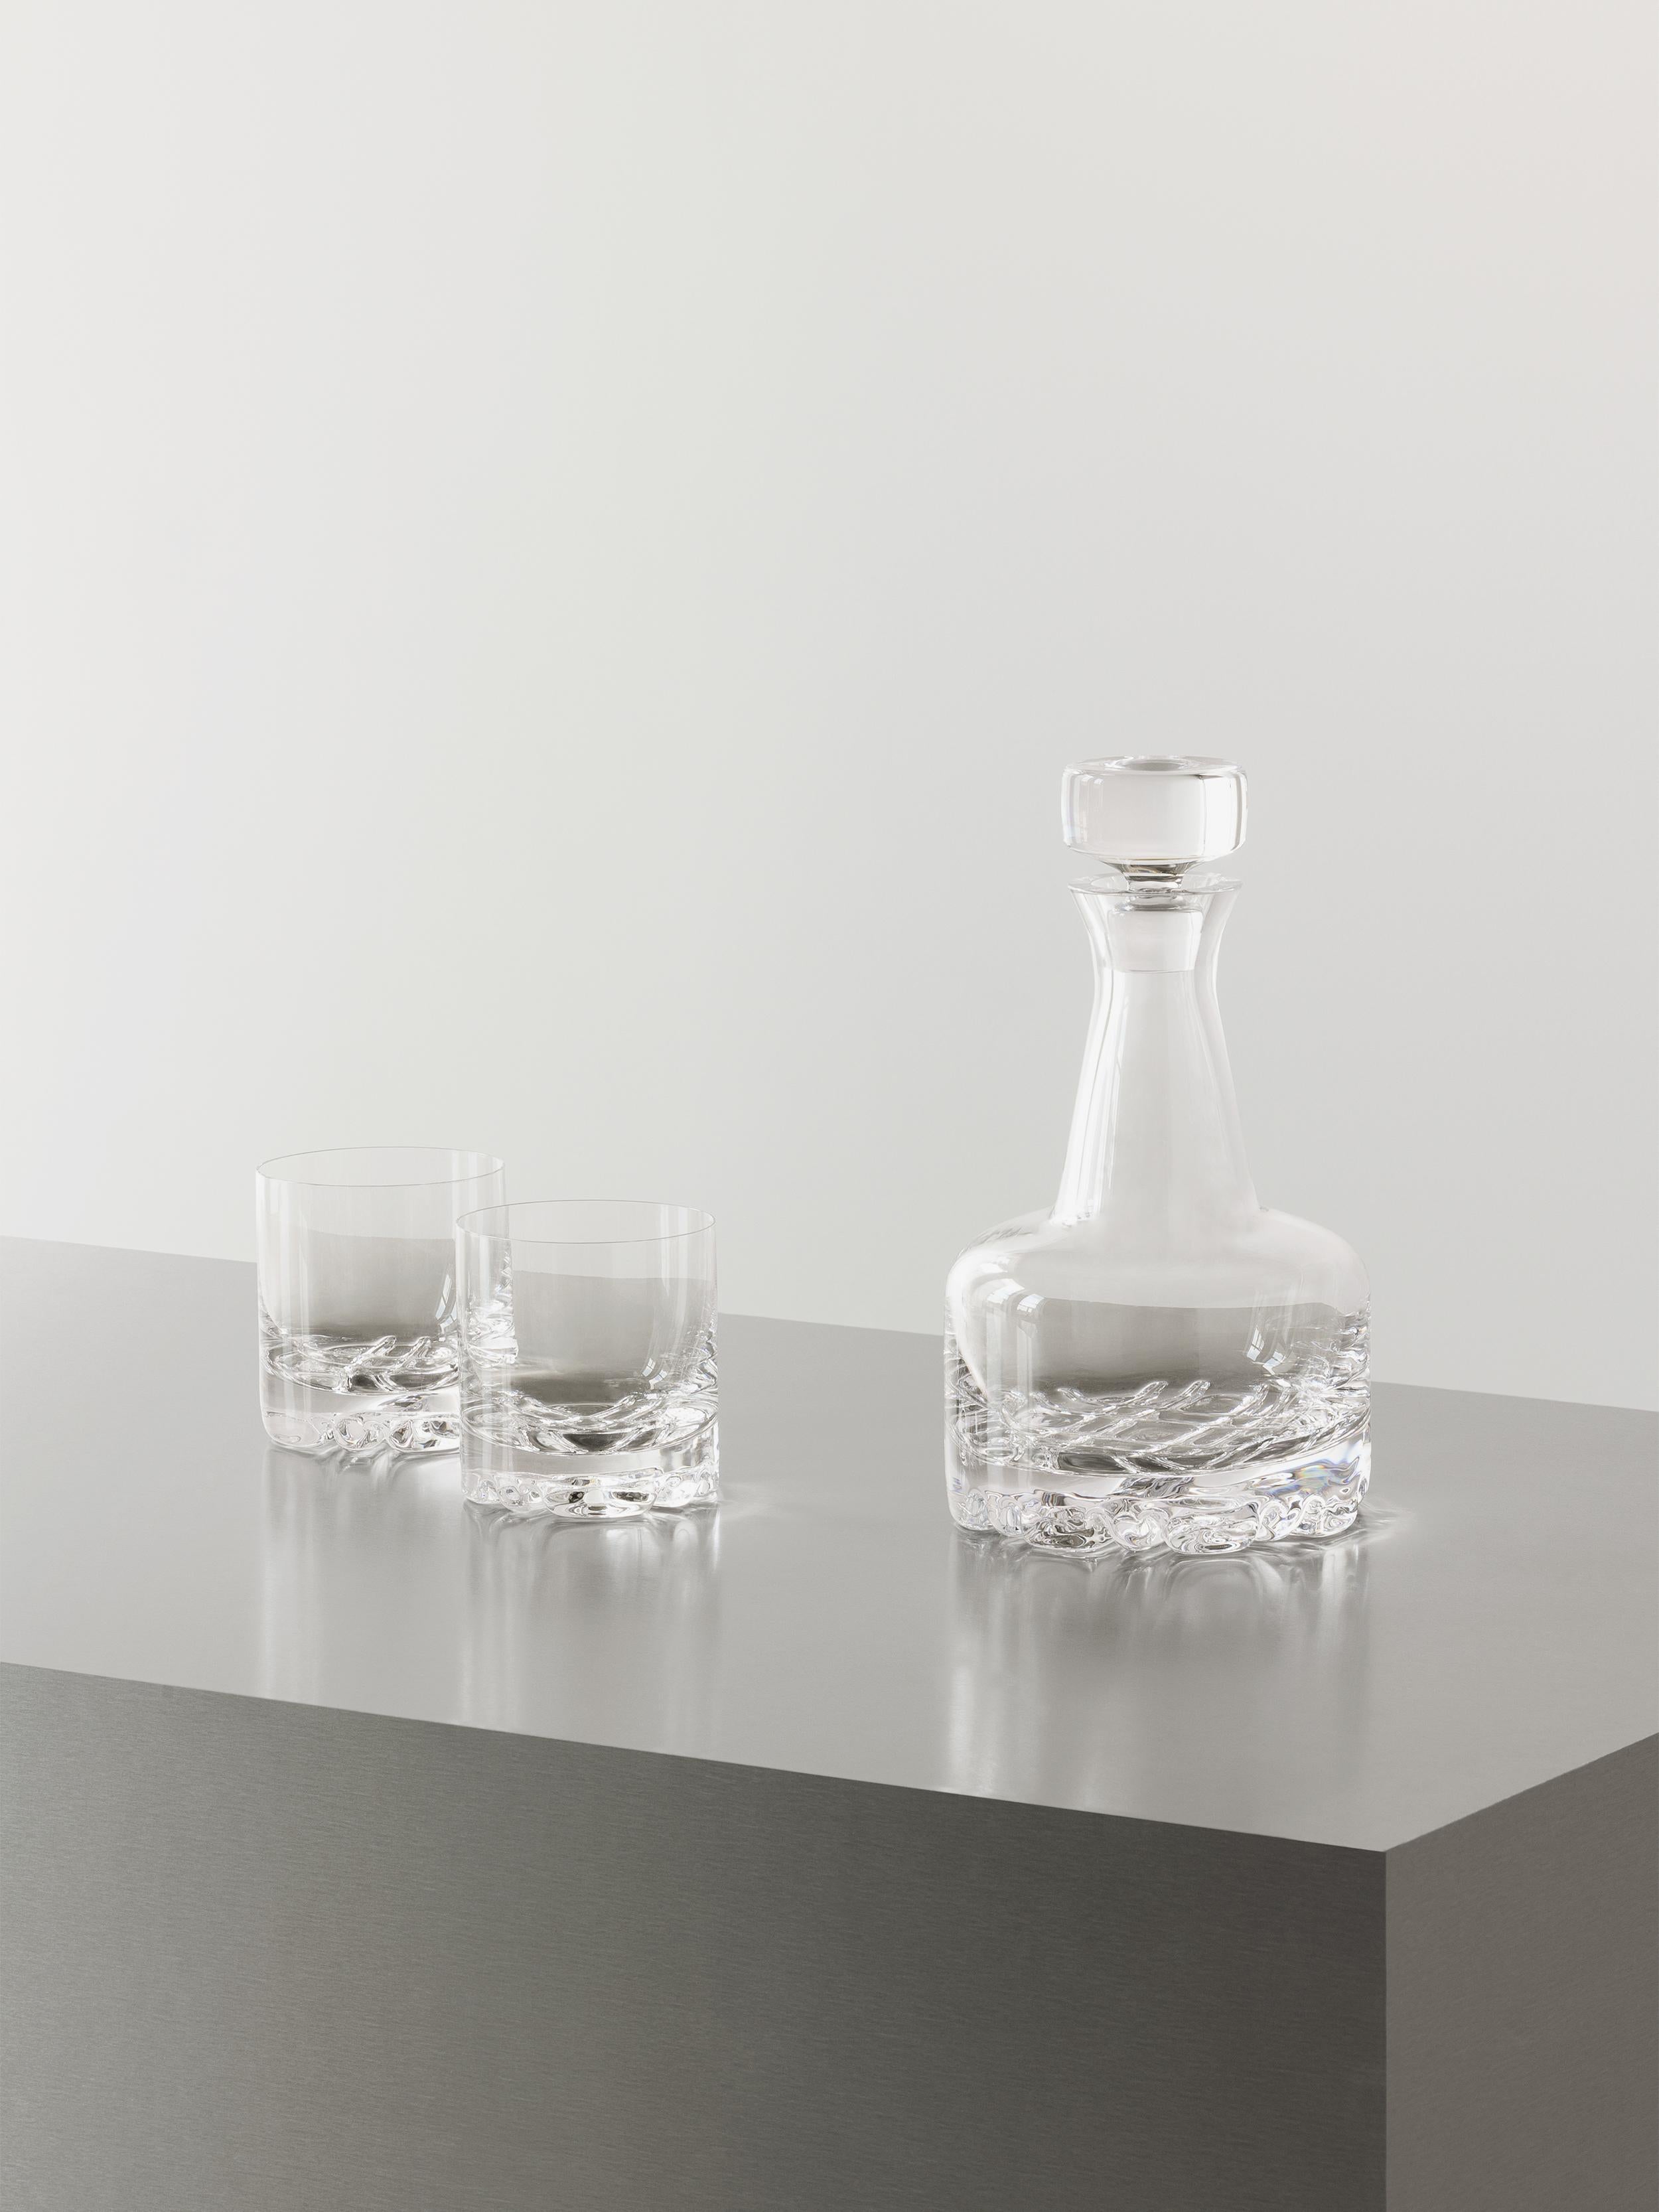 The Erik 3 Piece Set from Orrefors consists of one decanter and two DOF glasses. A perfect set for all whiskey enthusiasts appreciating modern 70s design distinguished by Scandinavian simplicity and clean lines. The decanter, holding 26 oz, allows